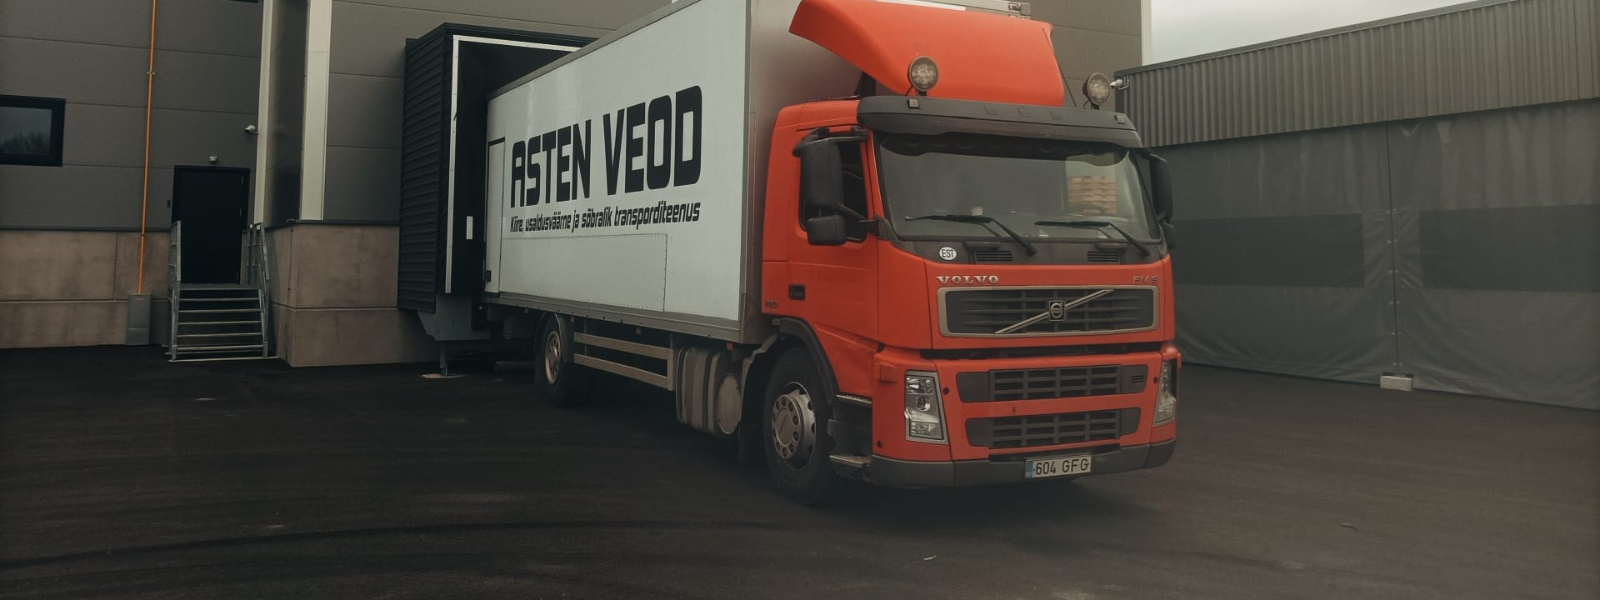 ASTENVEOD OÜ - freight transport, parcel delivery, express transport, freight transport Estonia, fast cargo delivery, roa...